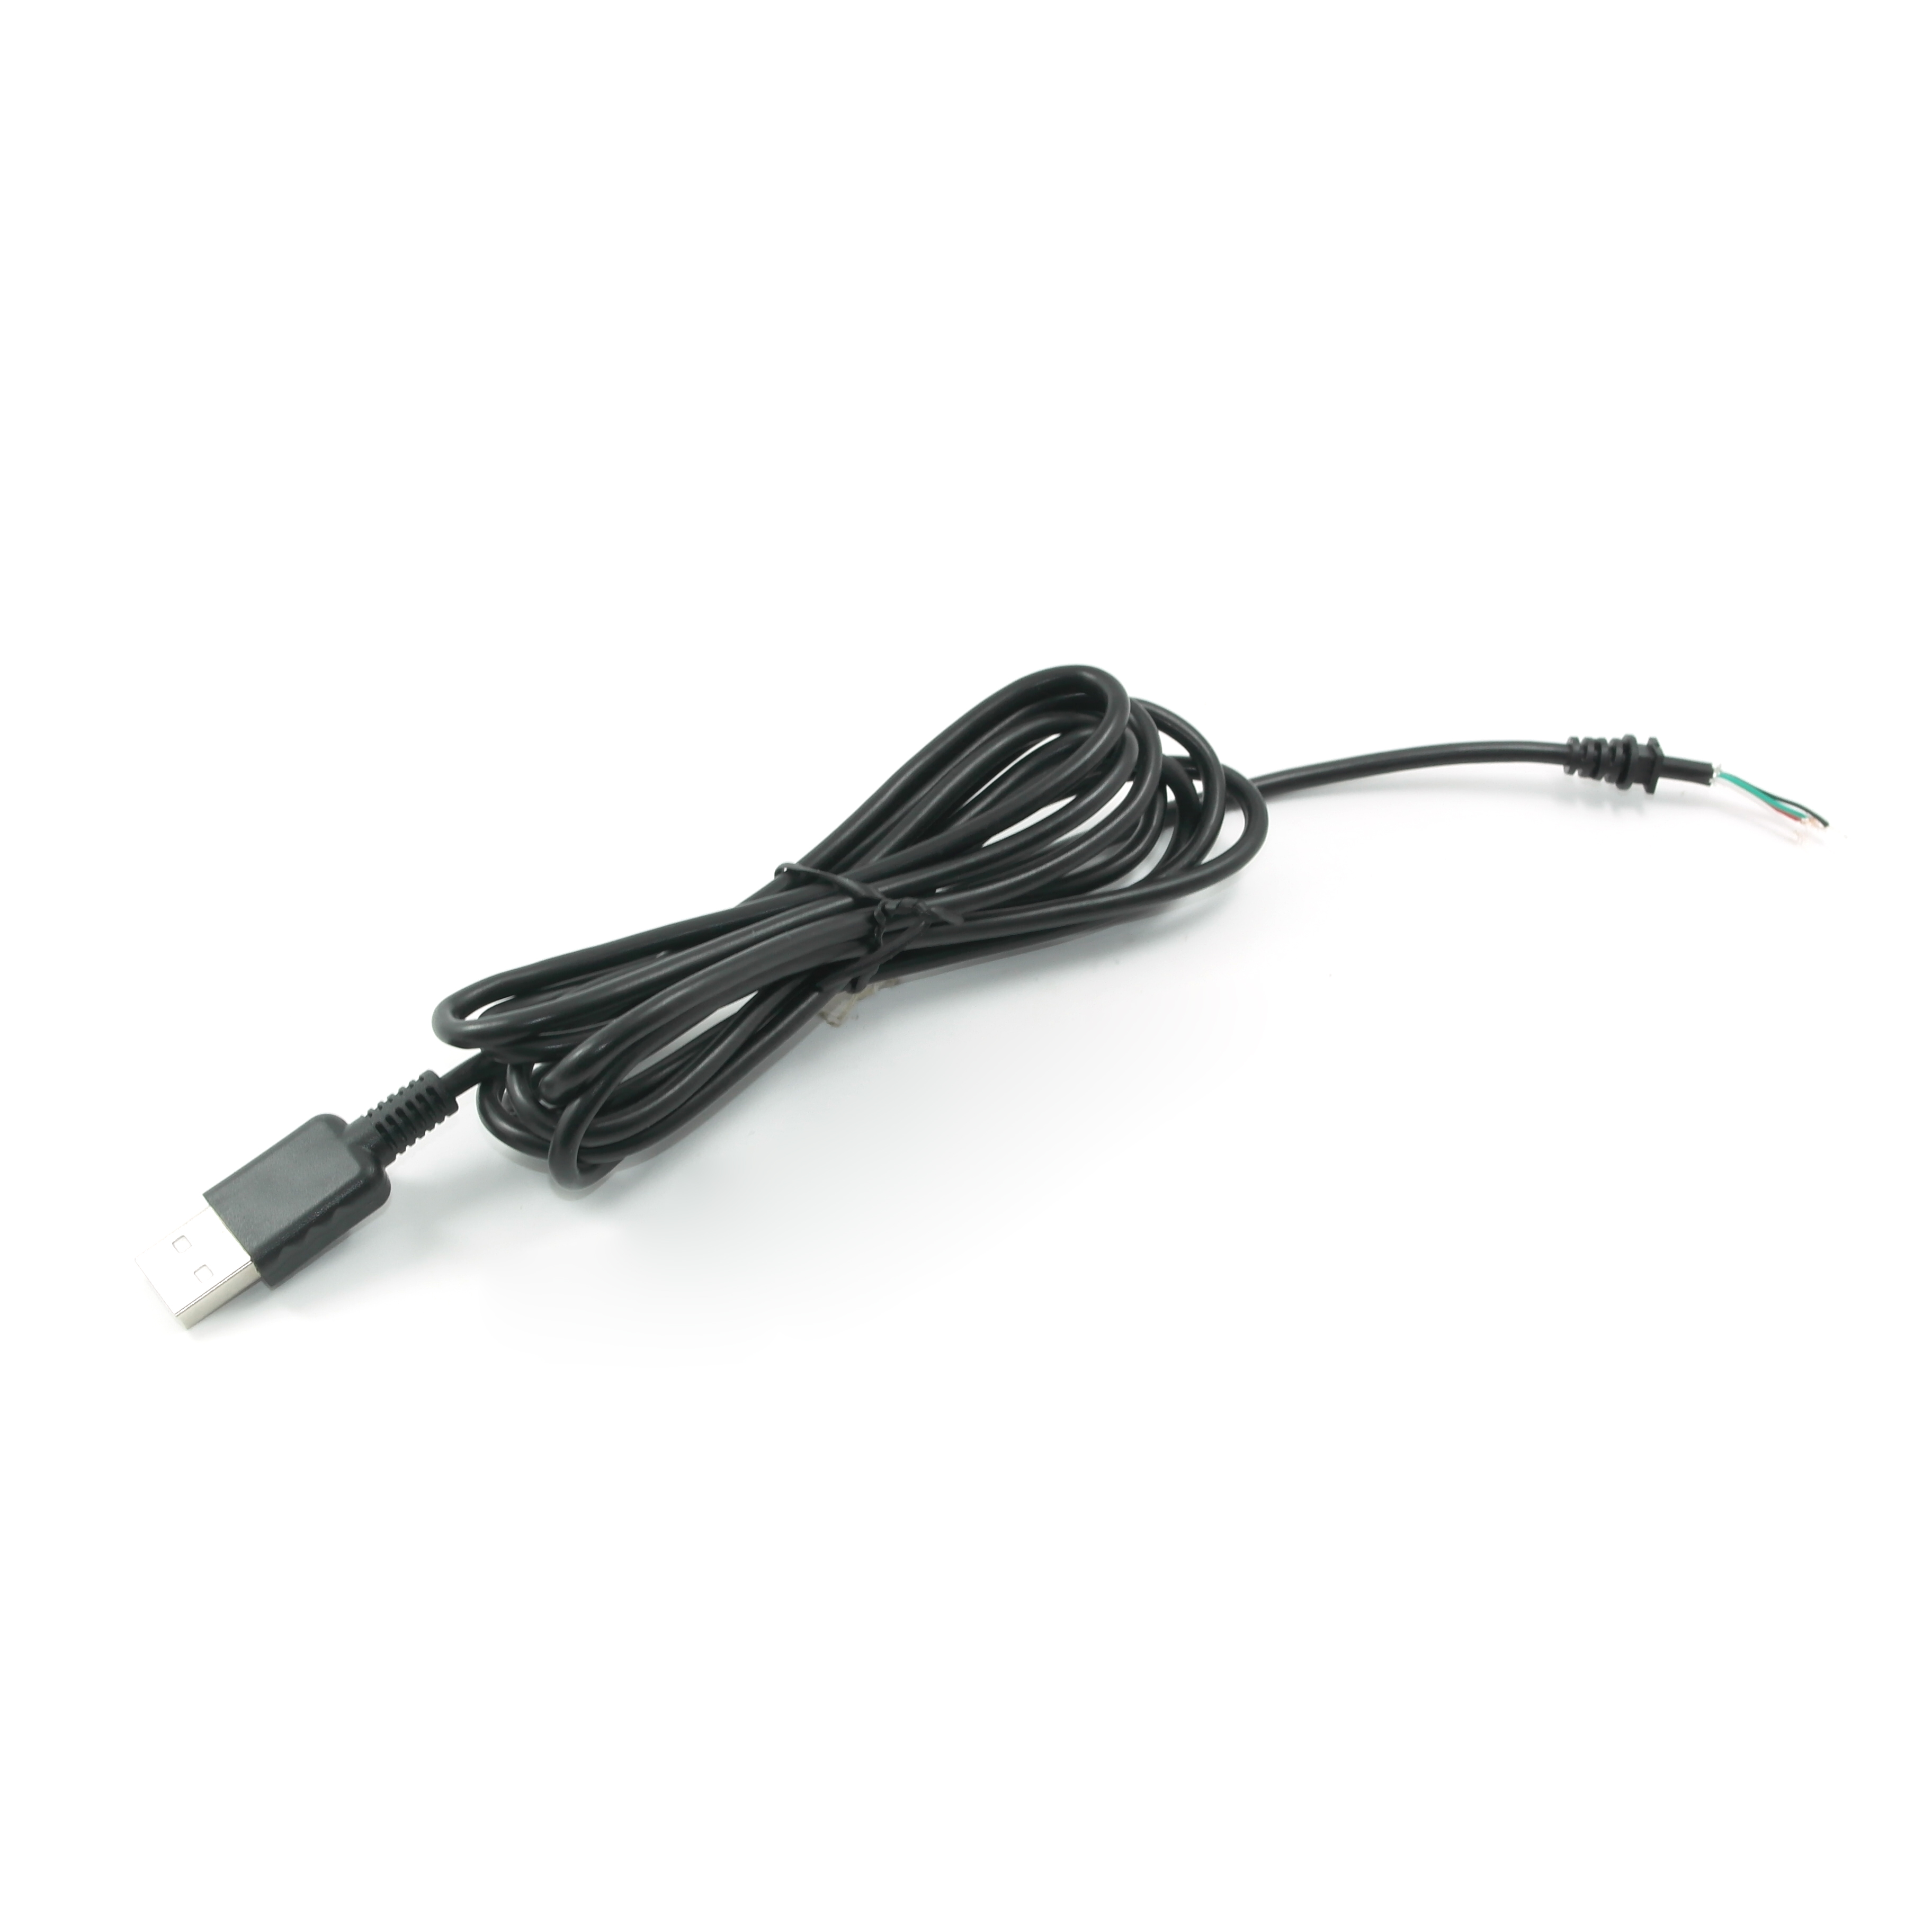 KREUSB2LEADS,USB to Ends(4C)